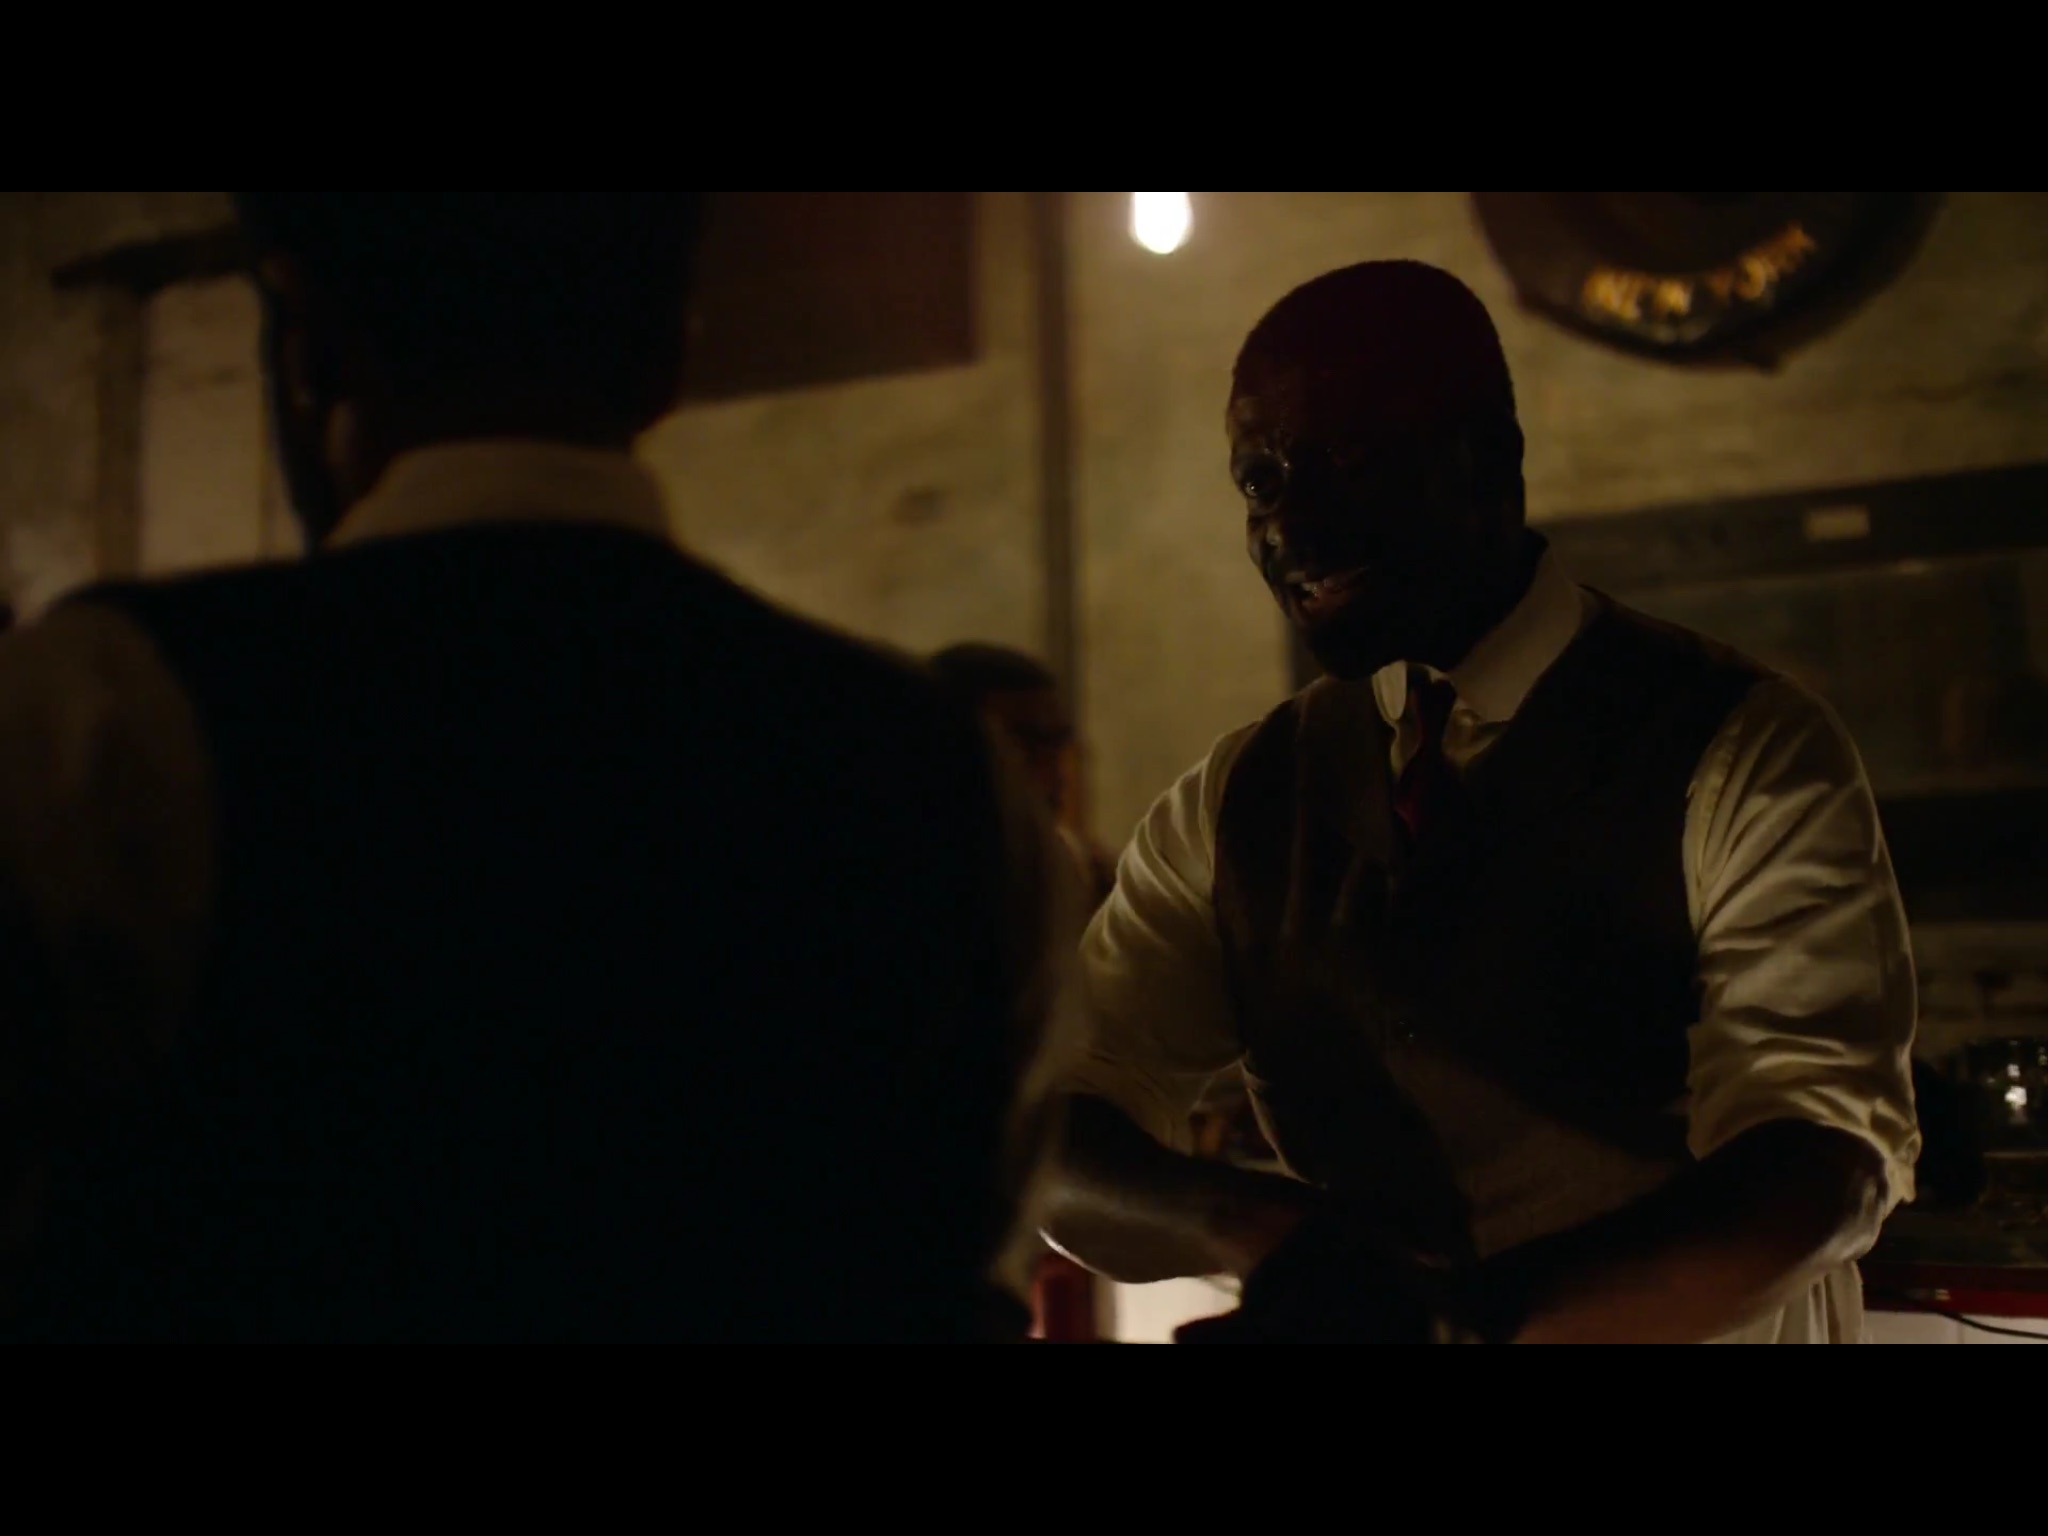 Still of Oberon K.A. Adjepong in THE KNICK